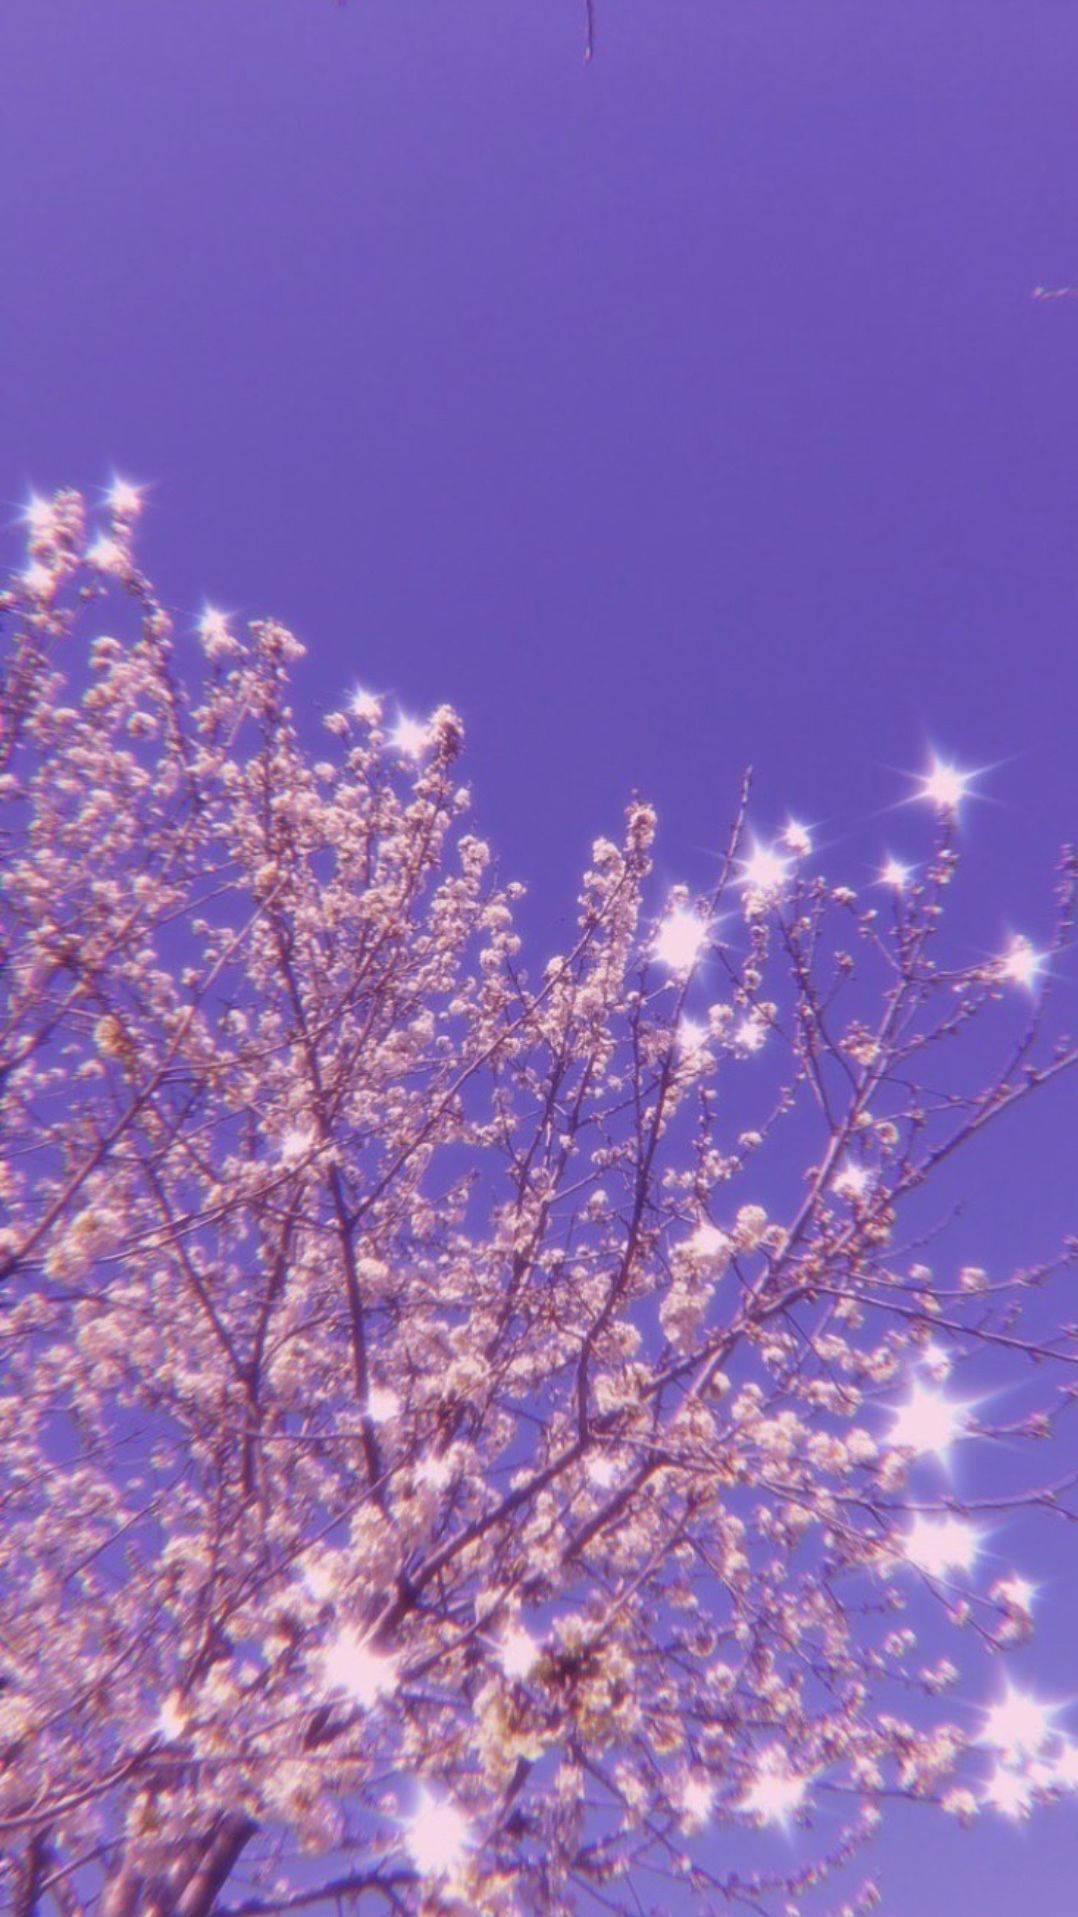 Sparkly Cherry Blossoms With Light Purple Sky Background